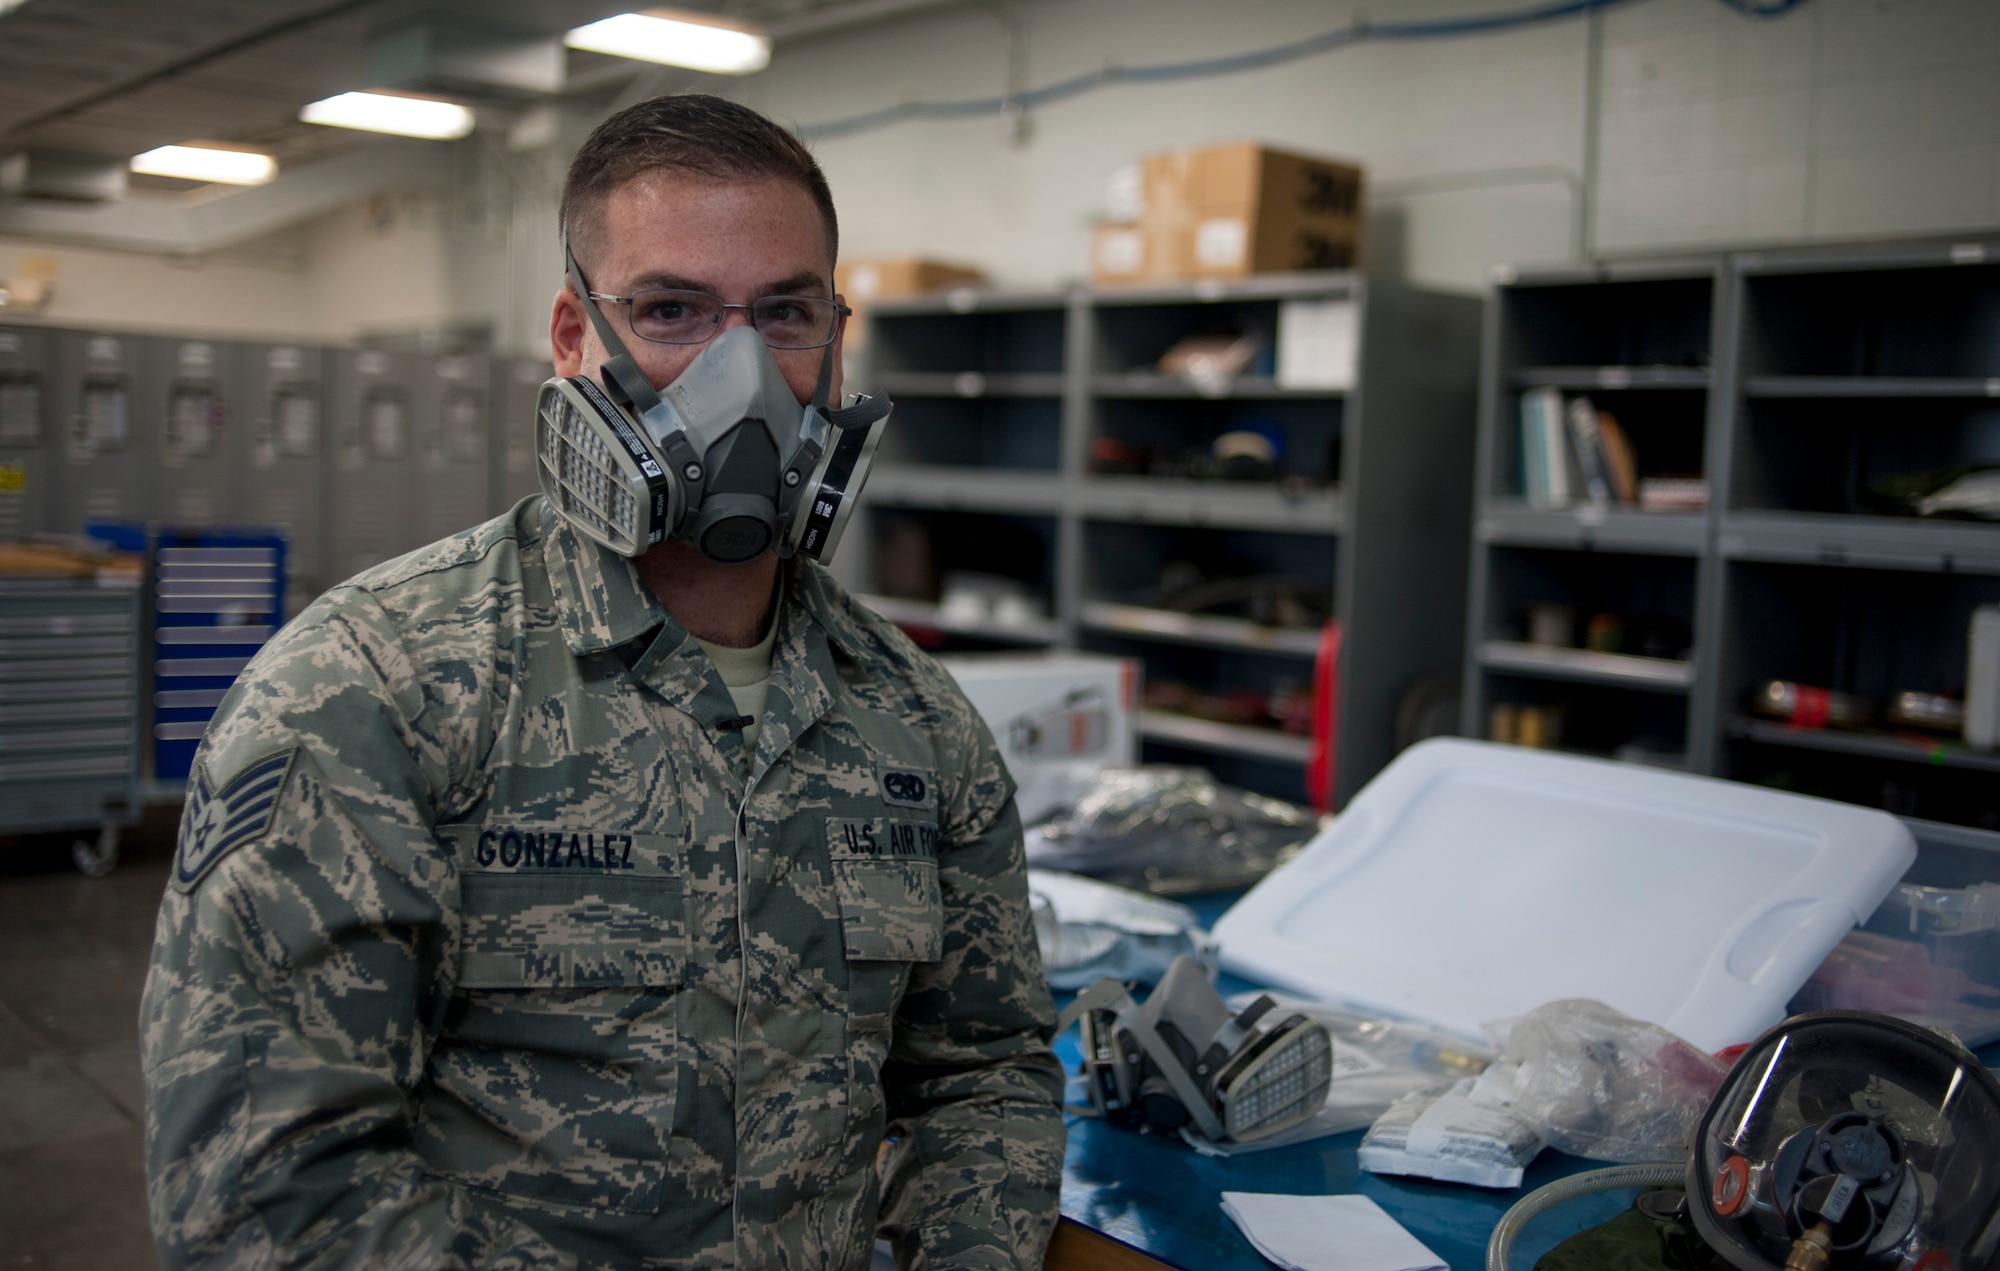 U.S. Air Force Staff Sgt. Adrian Gonzalez, an aircraft fuel systems craftsman with the 6th Maintenance Squadron, demonstrates how to wear a respirator at MacDill Air Force Base, Fla., May 30, 2018.